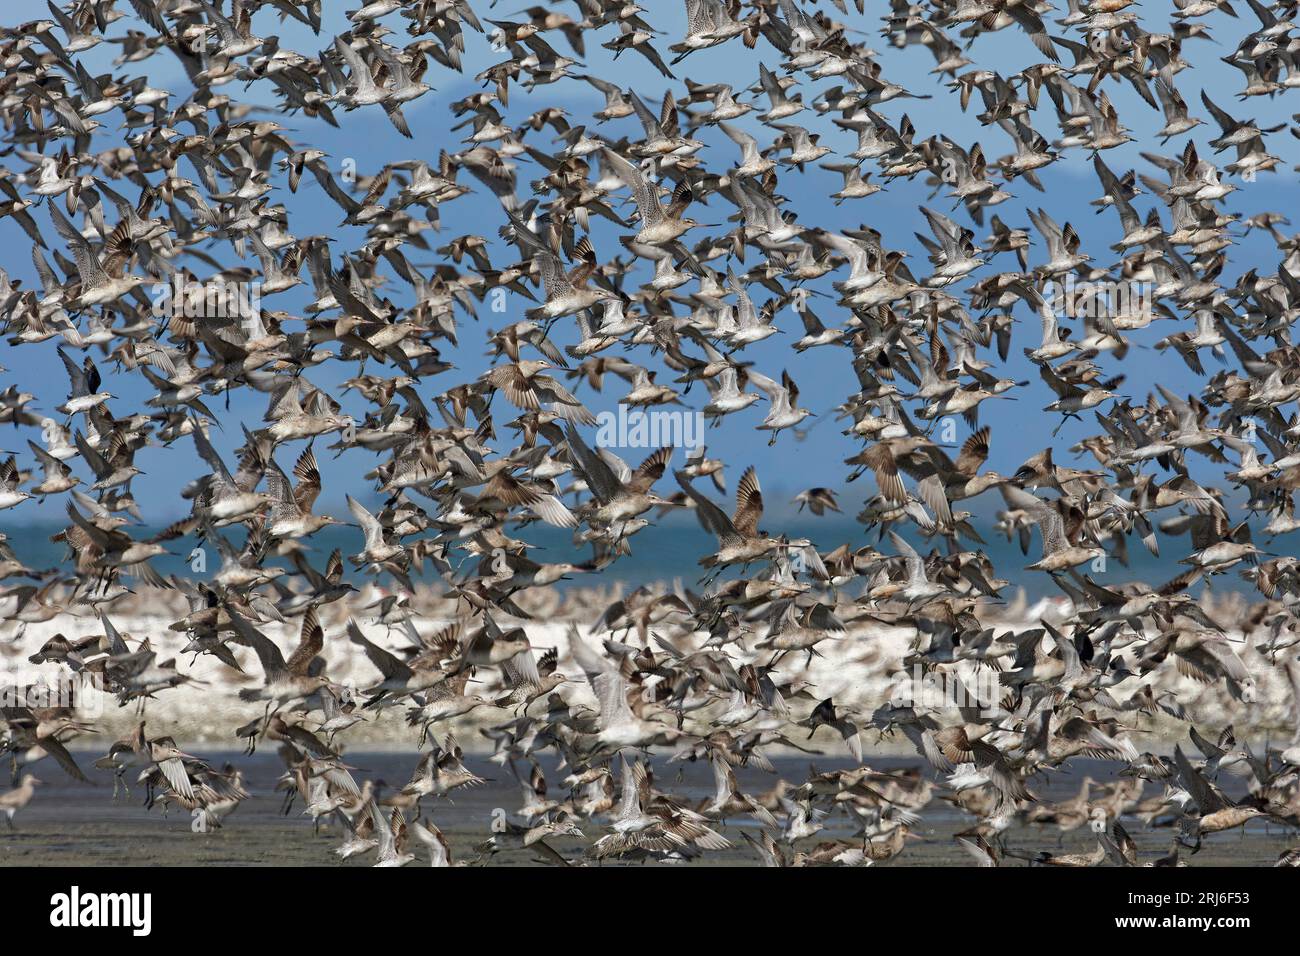 Hundreds of Bar-tailed Godwits - Limosa lapponica - simultaneously take to the air in Miranda - New Zealand. Stock Photo